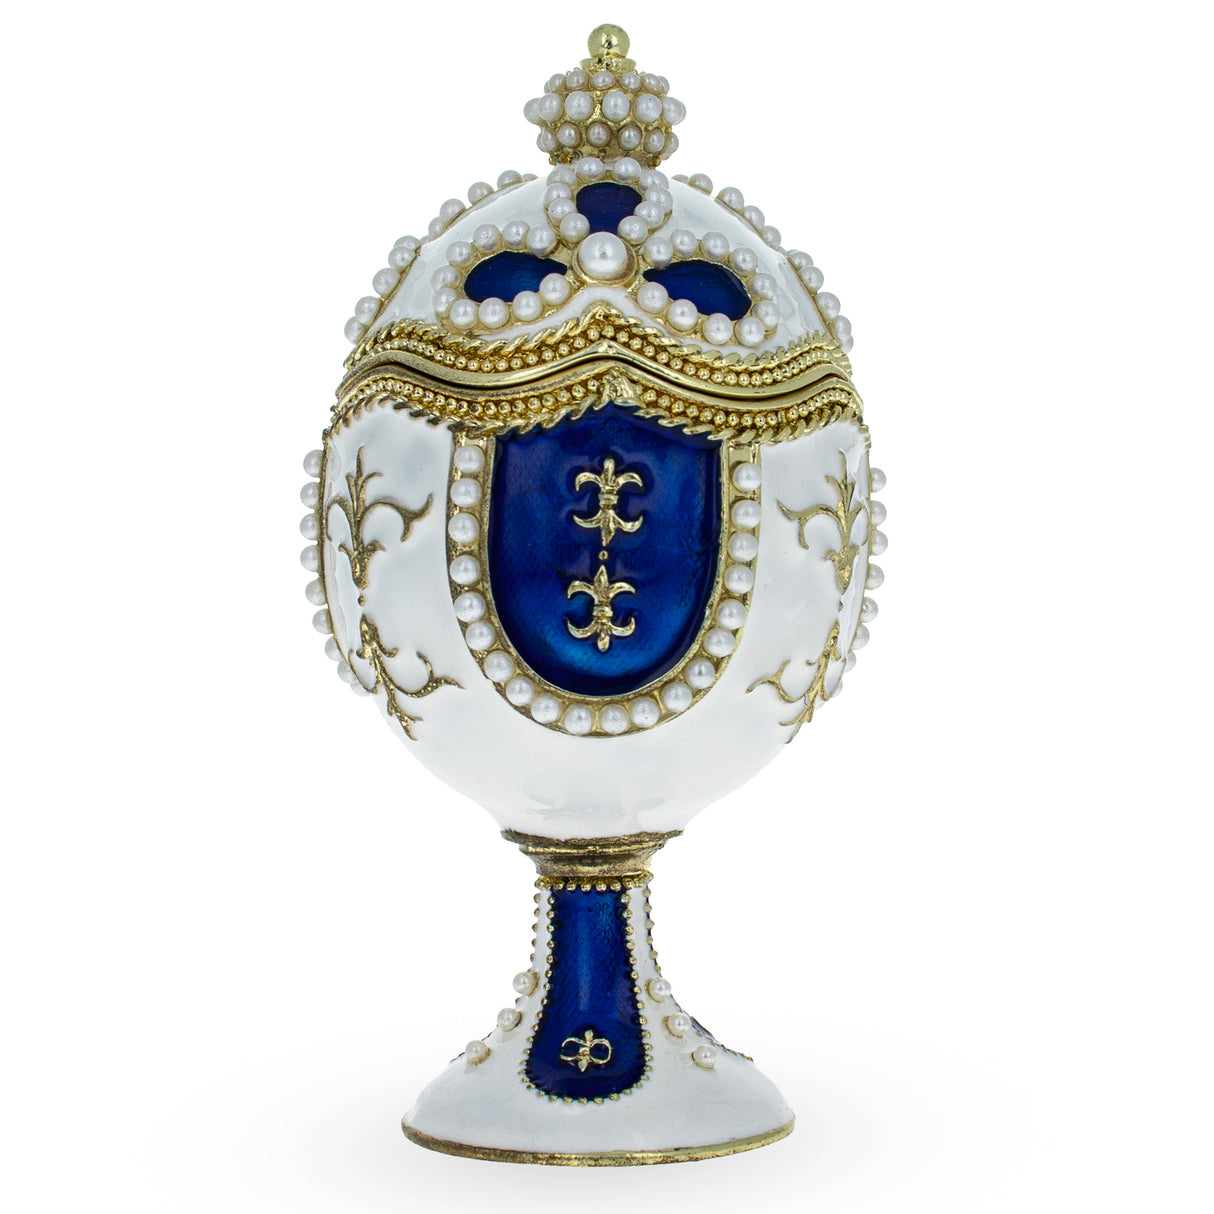 Pearls on White Enamel Royal Inspired Easter Egg 3.75 Inches in White color, Oval shape